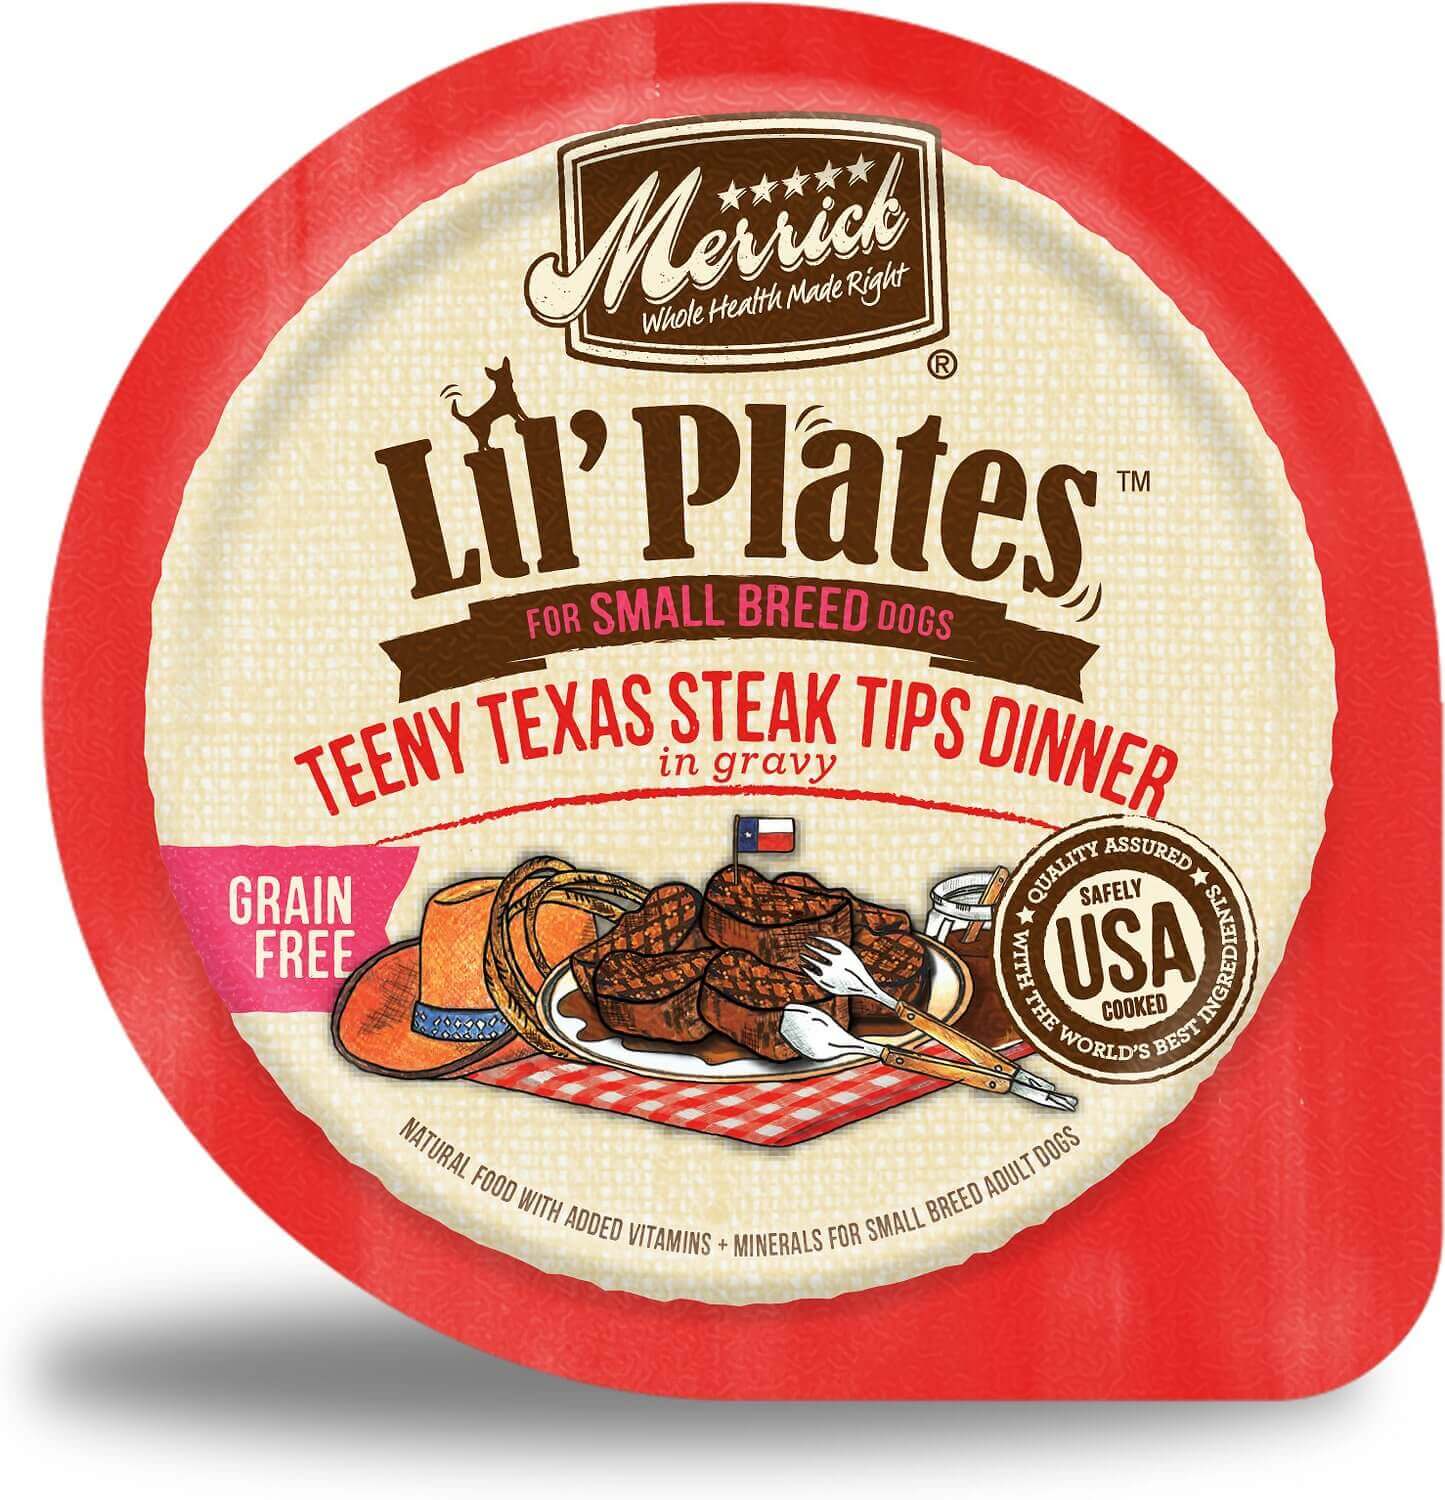 Merrick Lil’ Plates Small Breed Recipe - Best Dog Food for Picky Eaters